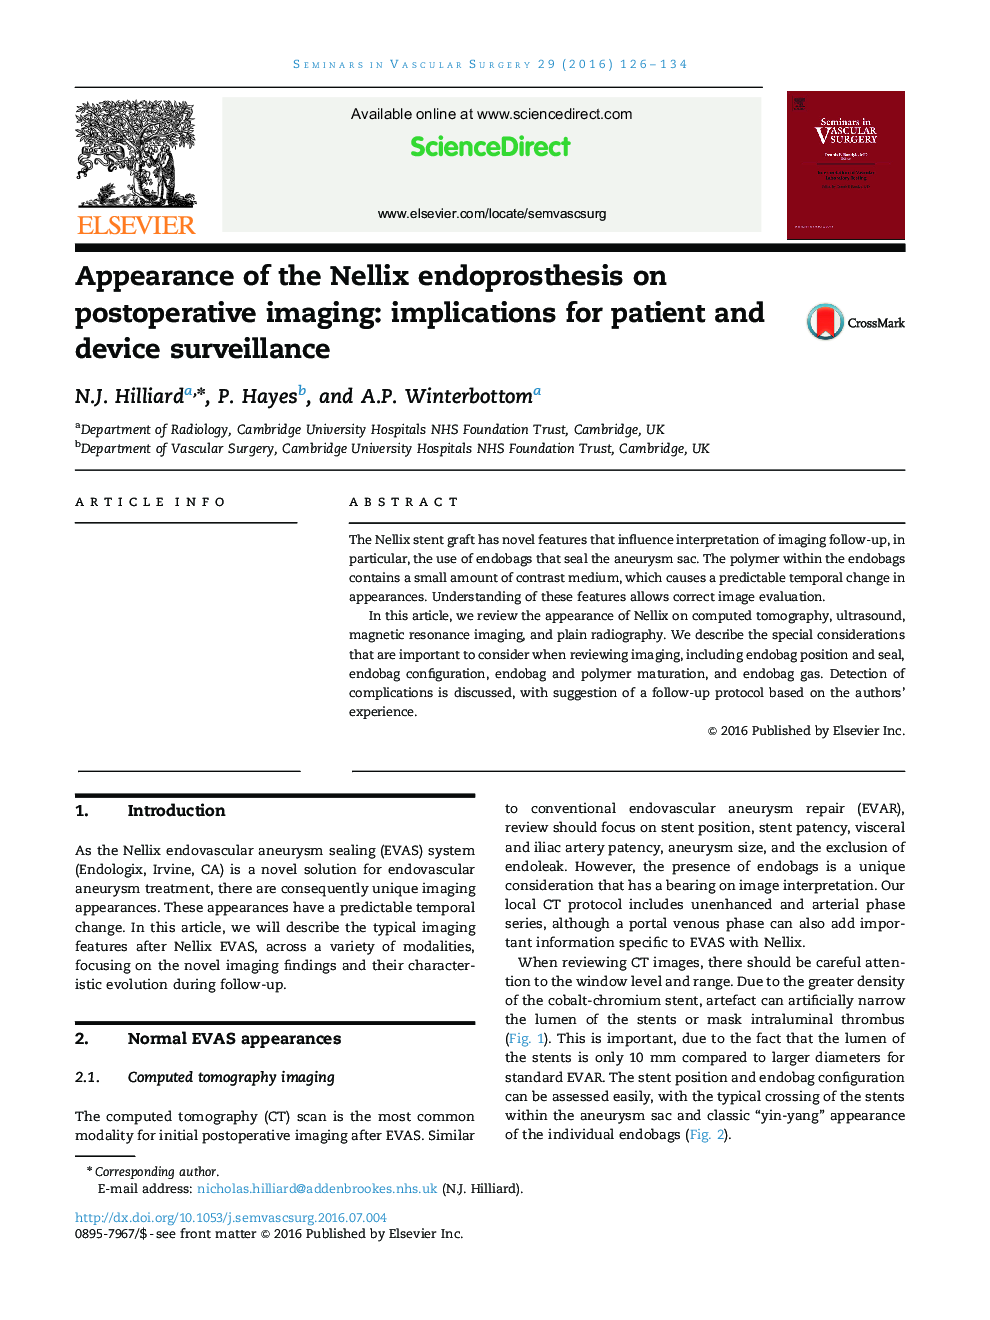 Appearance of the Nellix endoprosthesis on postoperative imaging: implications for patient and device surveillance